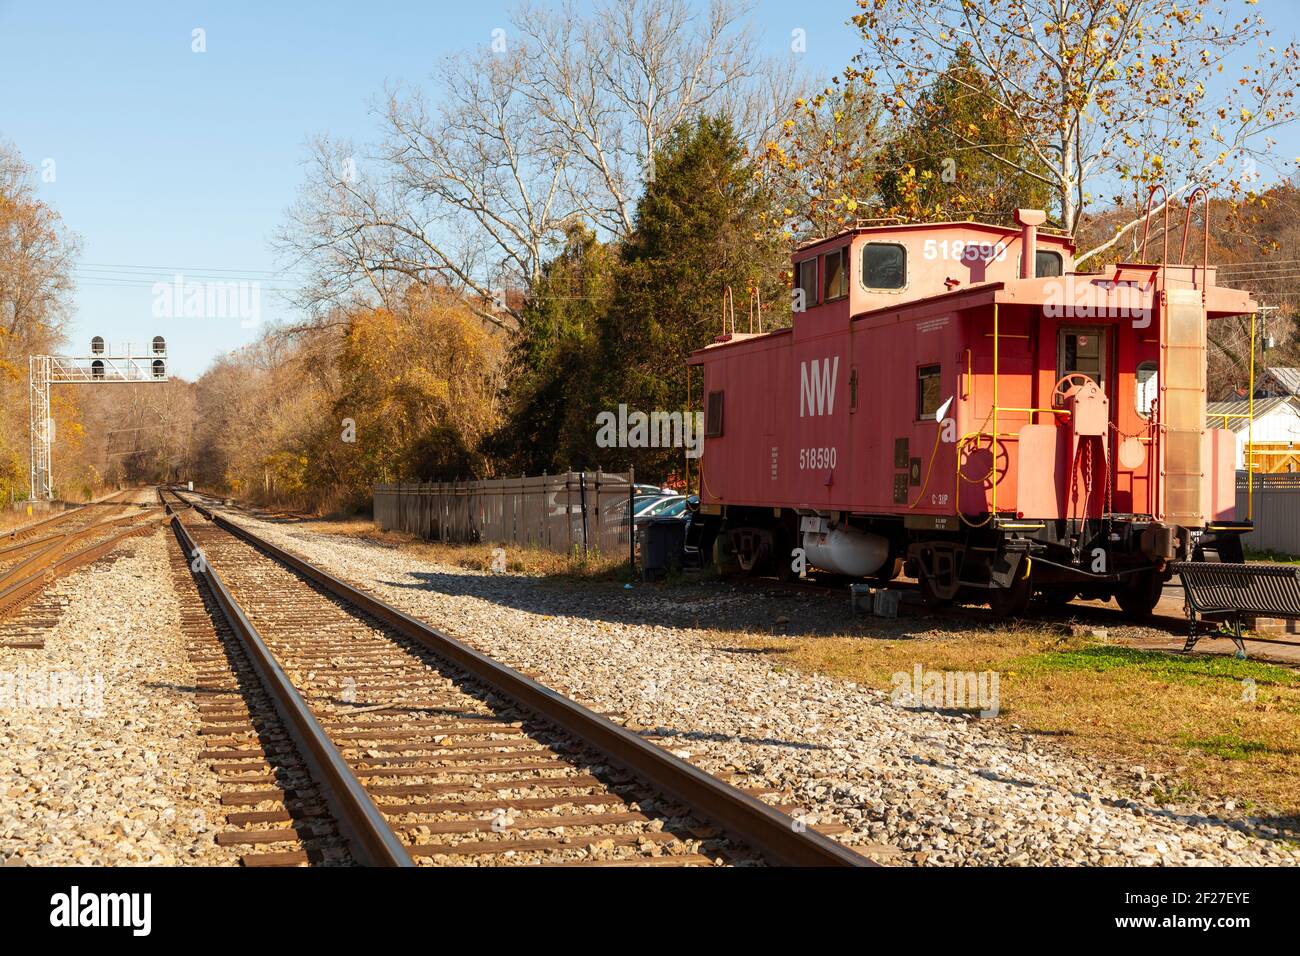 Clifton, VA, USA 11/14/2020: View of the train tracks, ballast, track sleepers and an abandoned red caboose passenger train cabin in front of historic Stock Photo